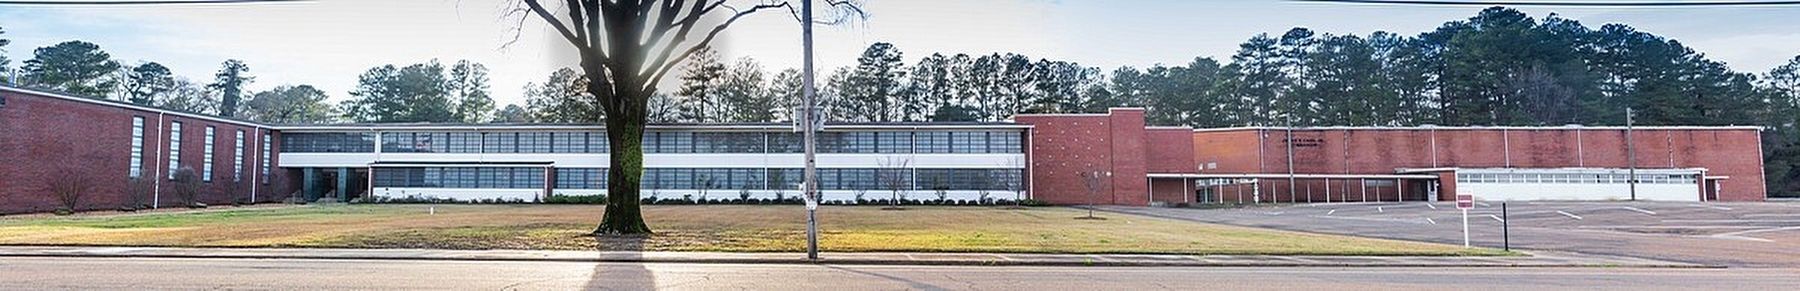 Former S.D. Lee High School image. Click for full size.